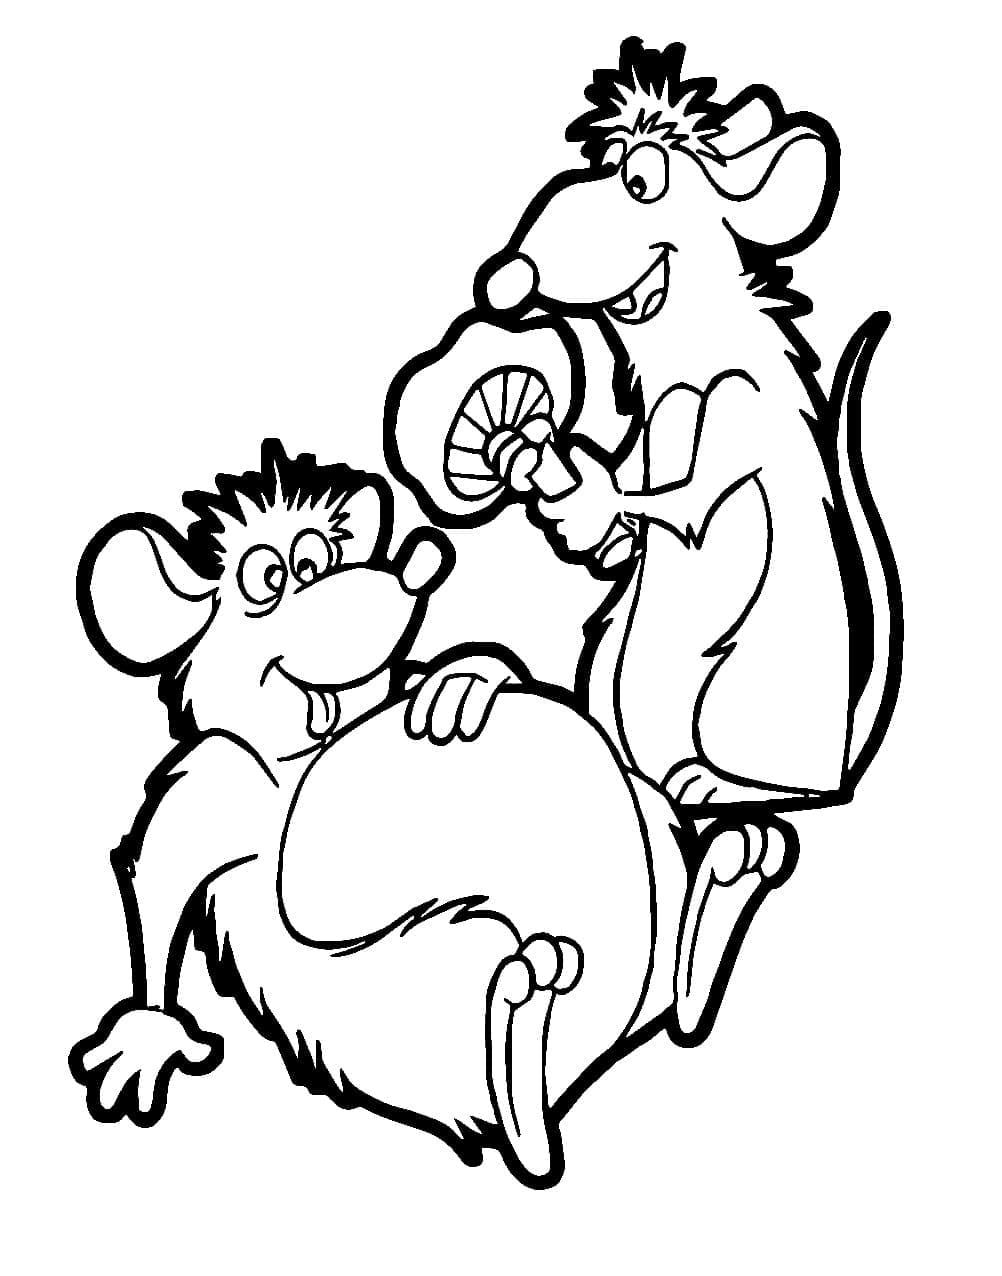 Emile and remy from ratatouille coloring page